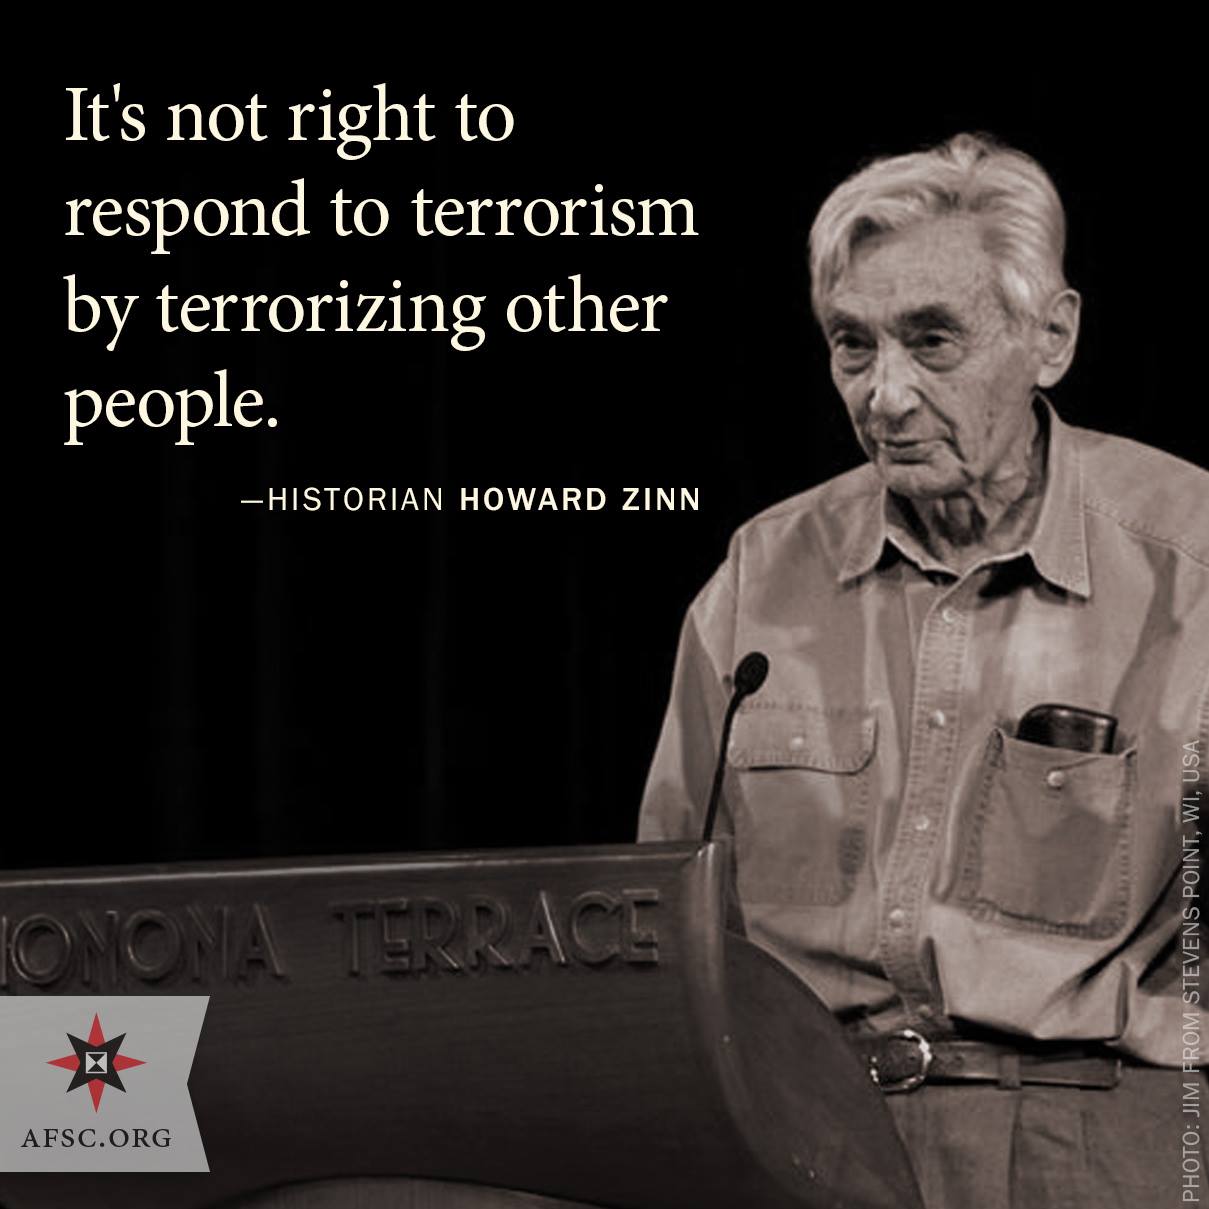 it's not right to respond to terrorism by terrorizing other people, howard zinn